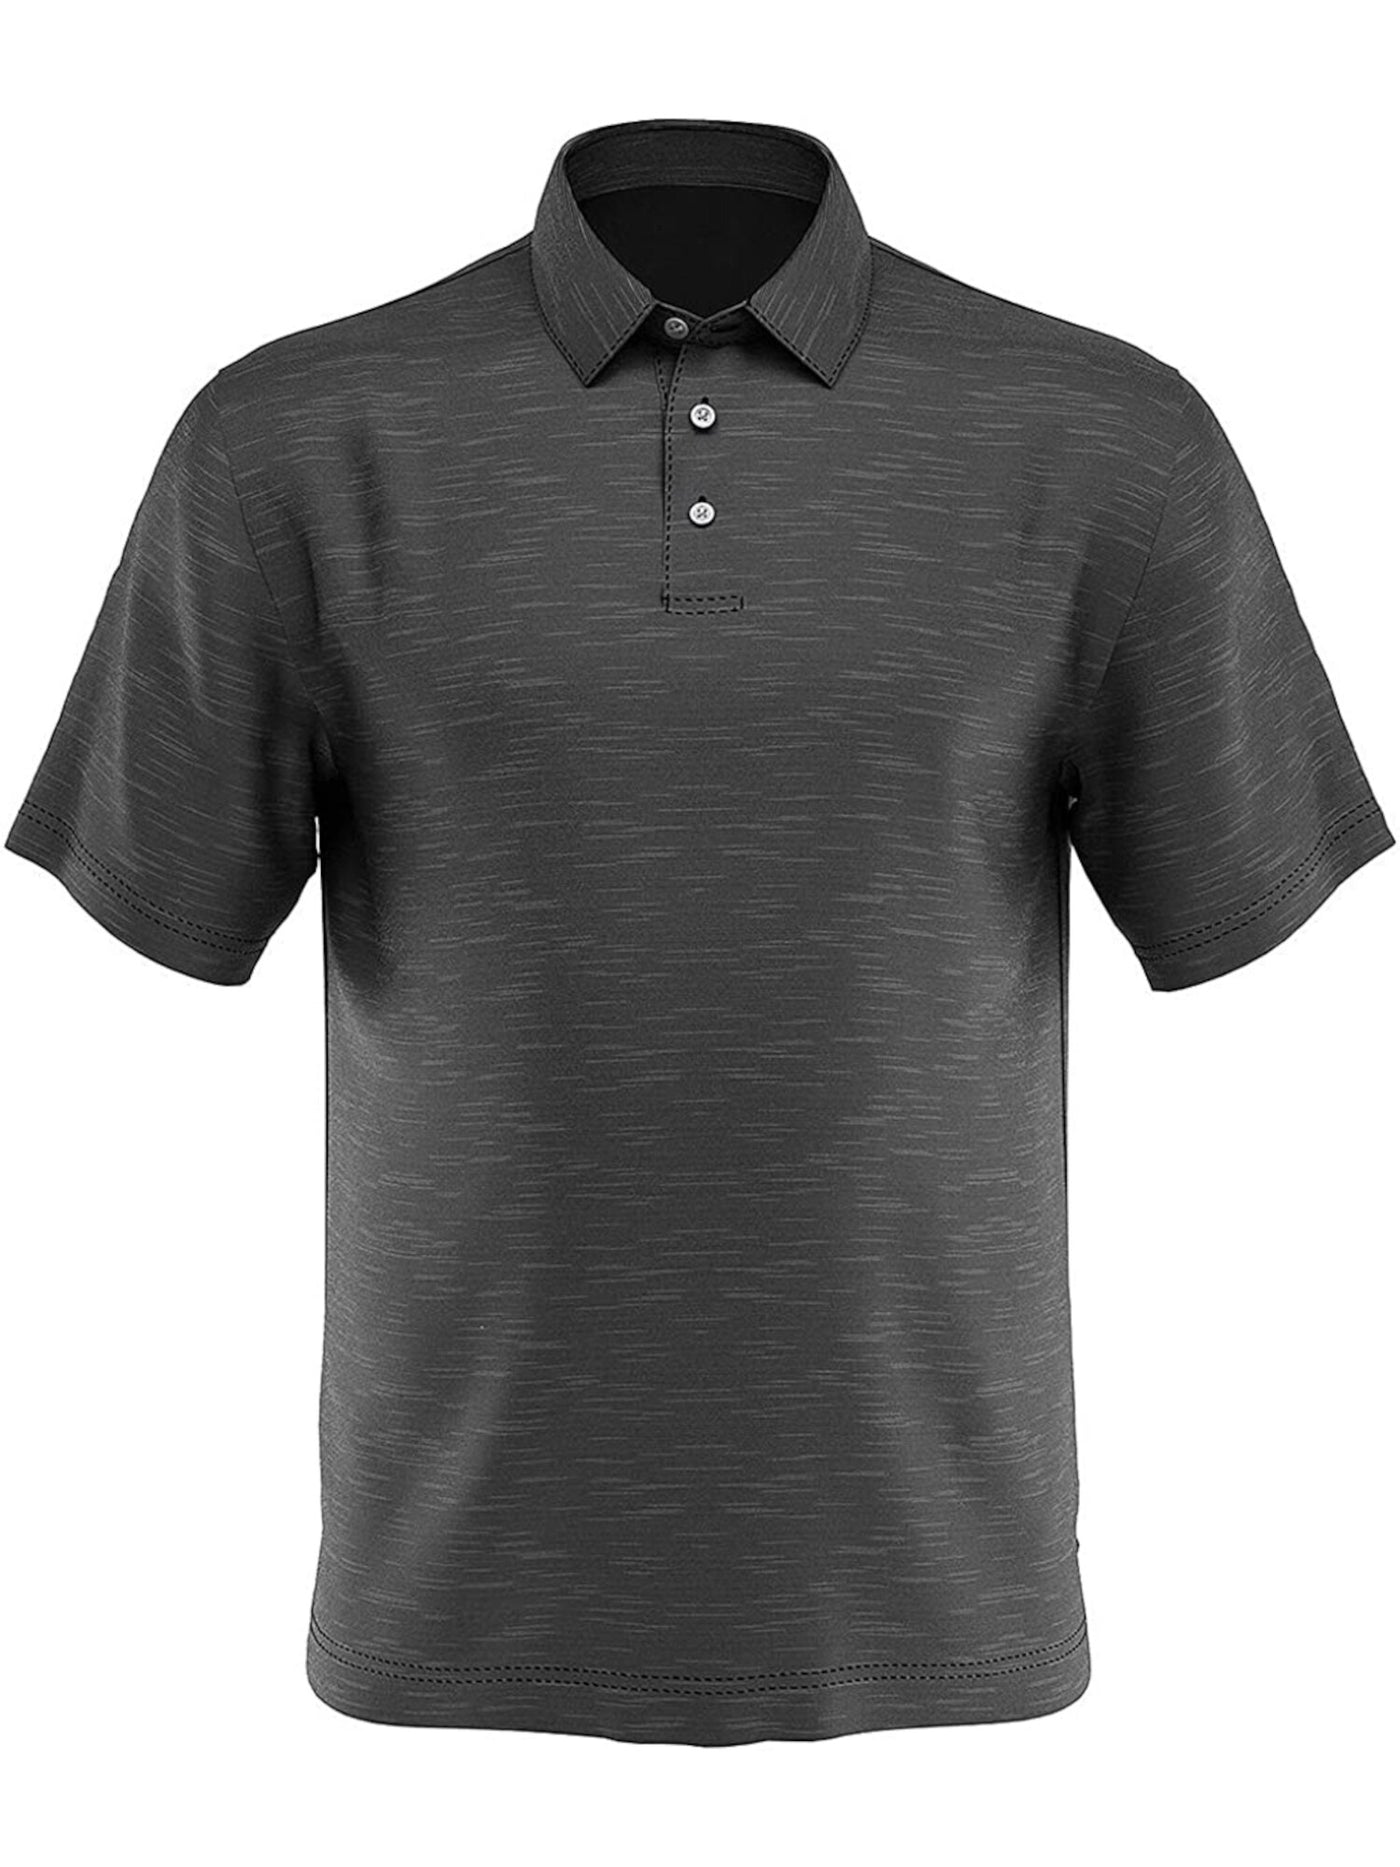 HYBRID APPAREL Mens Gray Heather Classic Fit Moisture Wicking Polo S